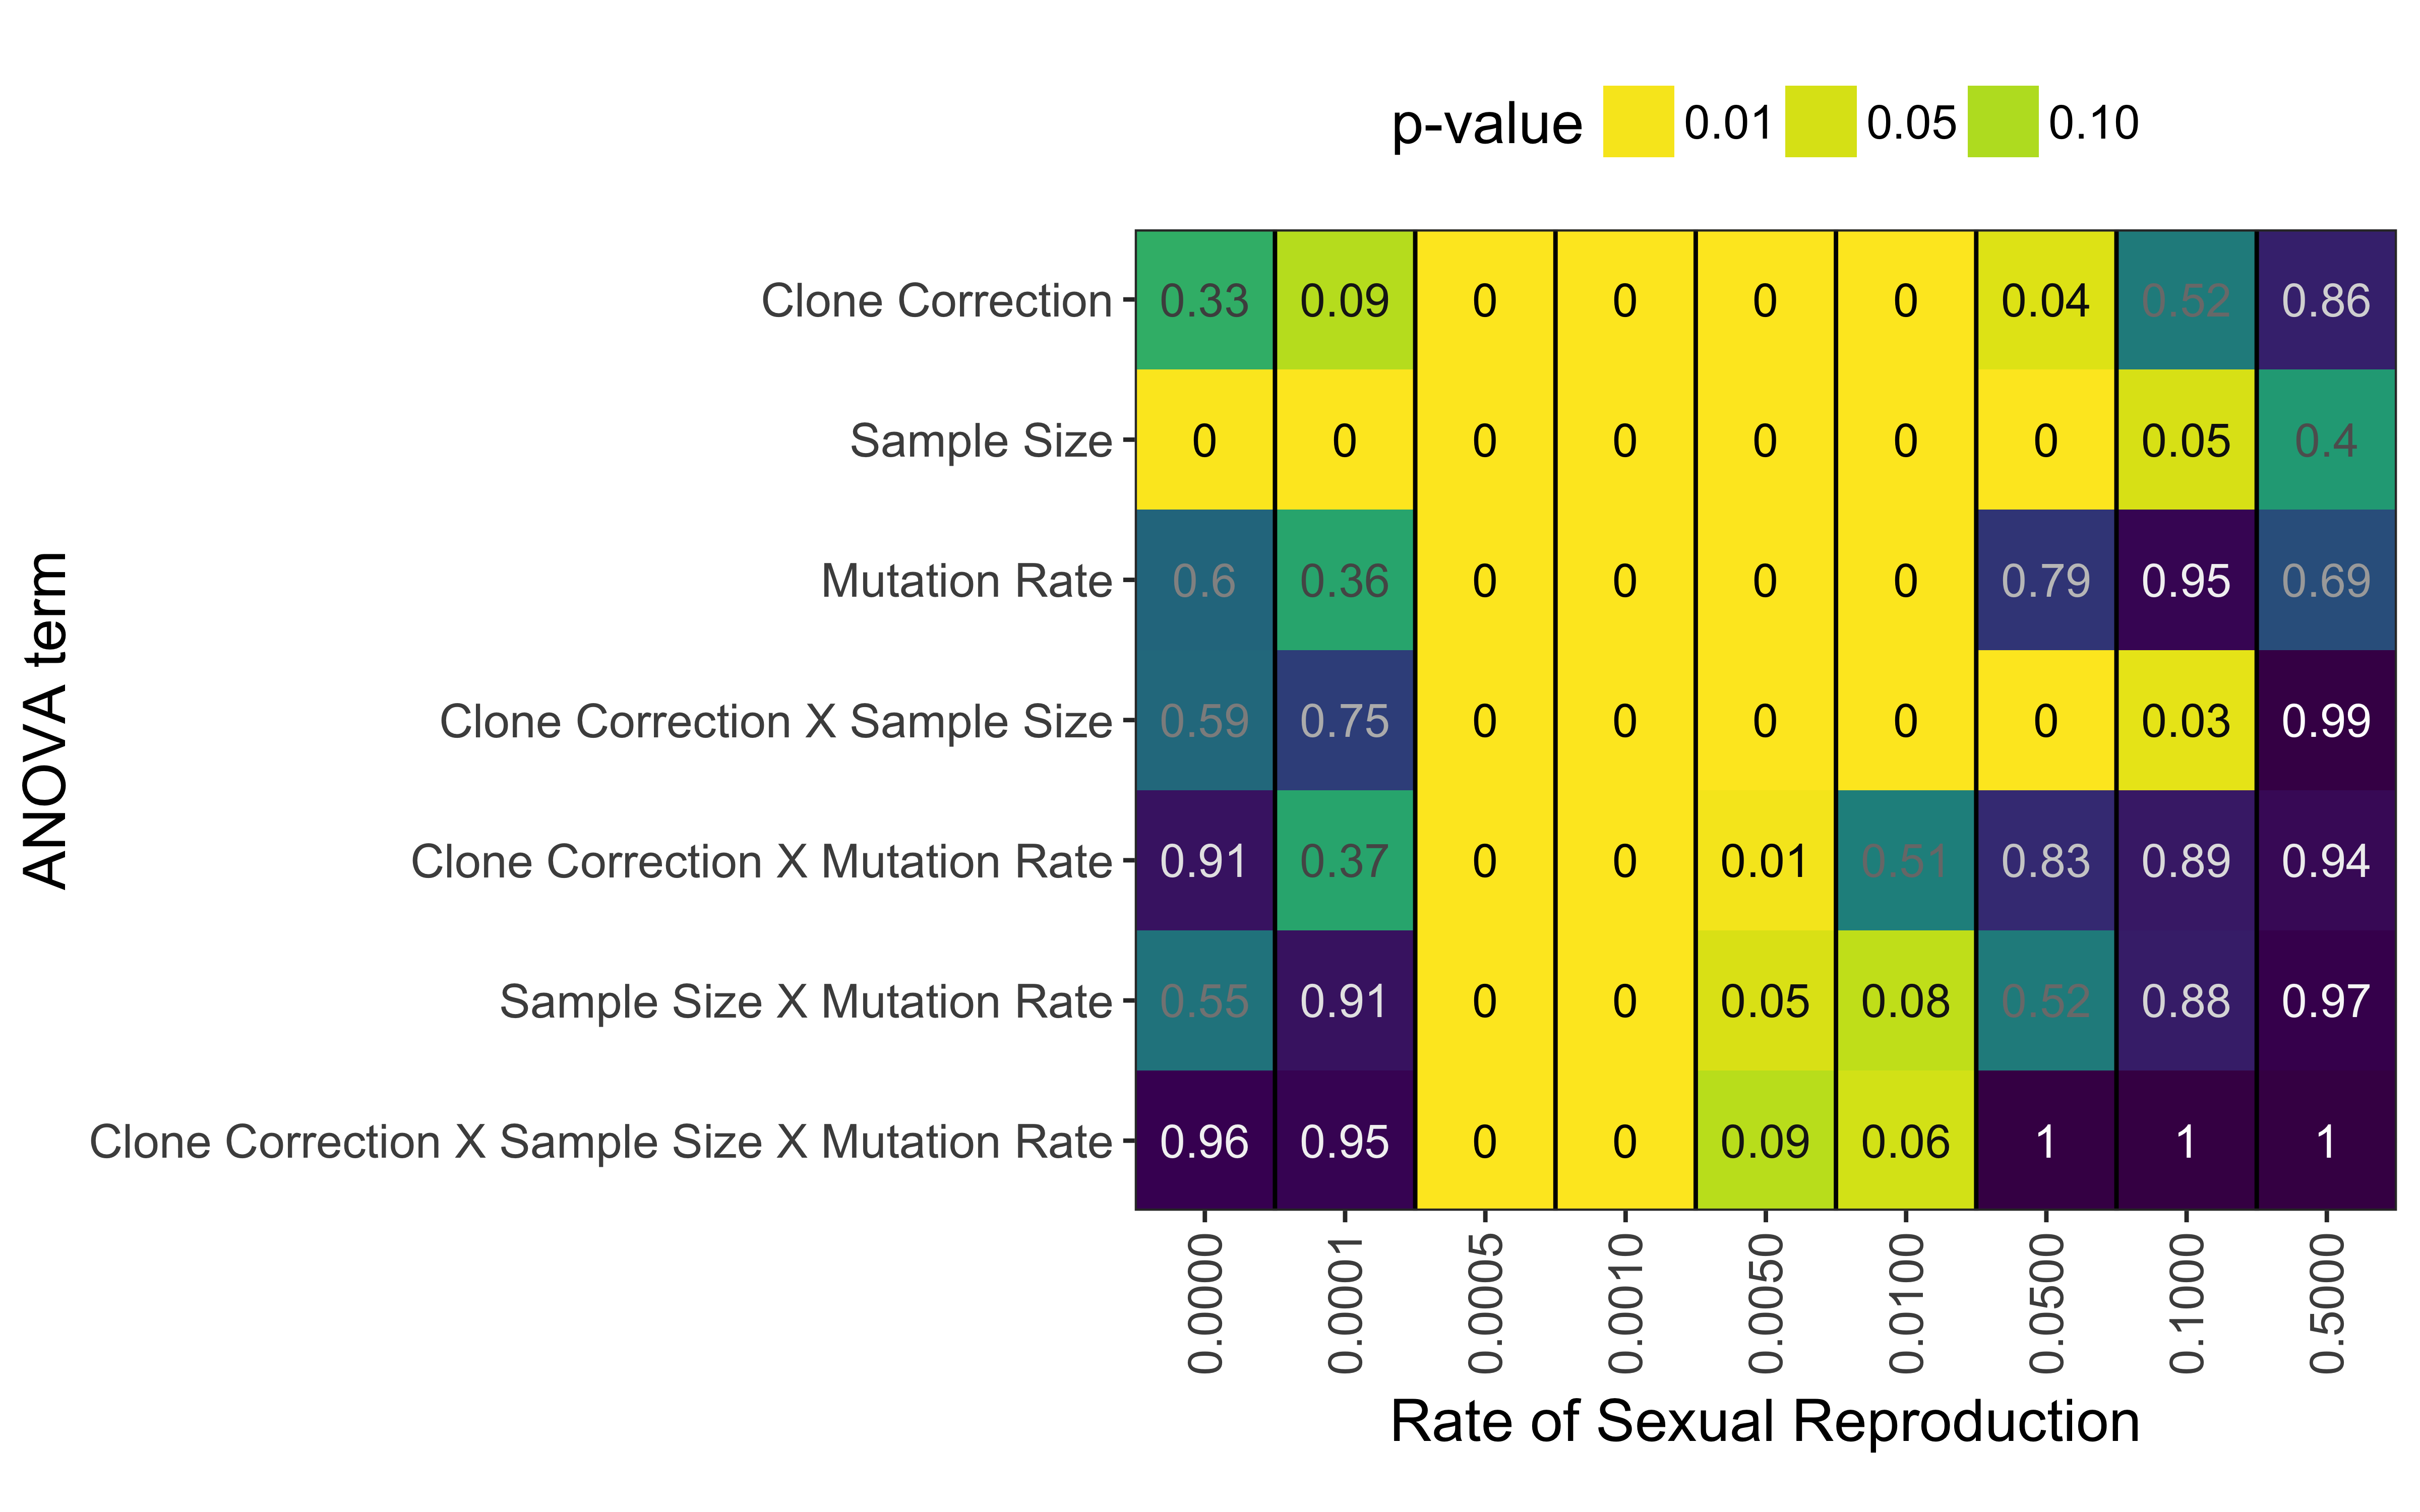 P-values from ANOVA analysis on AURC distributions with the model
$AURC \sim Clone Correction \times Sample Size \times Mutation Rate$ for
each rate of sexual reproduction separately taking into account allelic
evenness. P-values are represented both as colors and numbers.